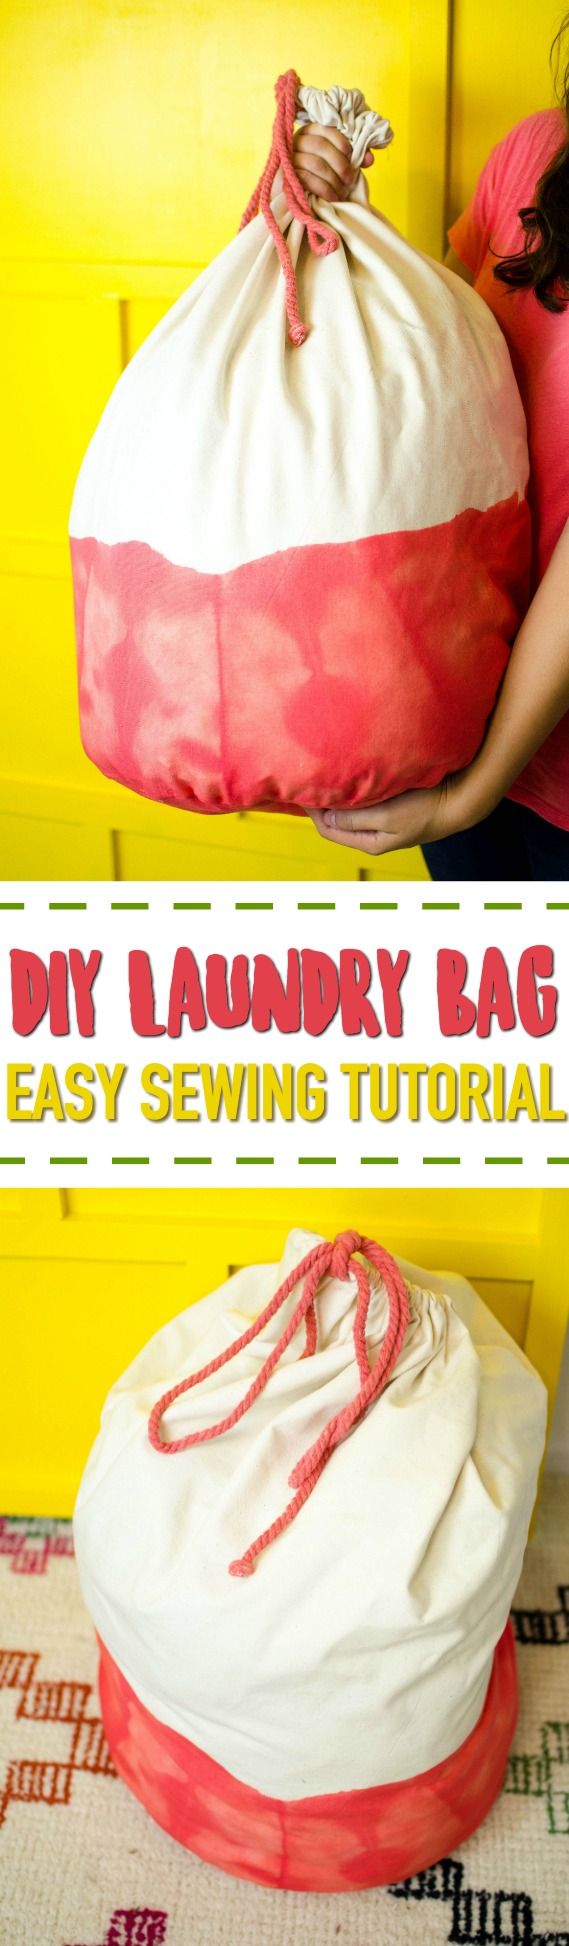 This DIY Laundry Bag is a great sewing project for beginners  using some basic s...